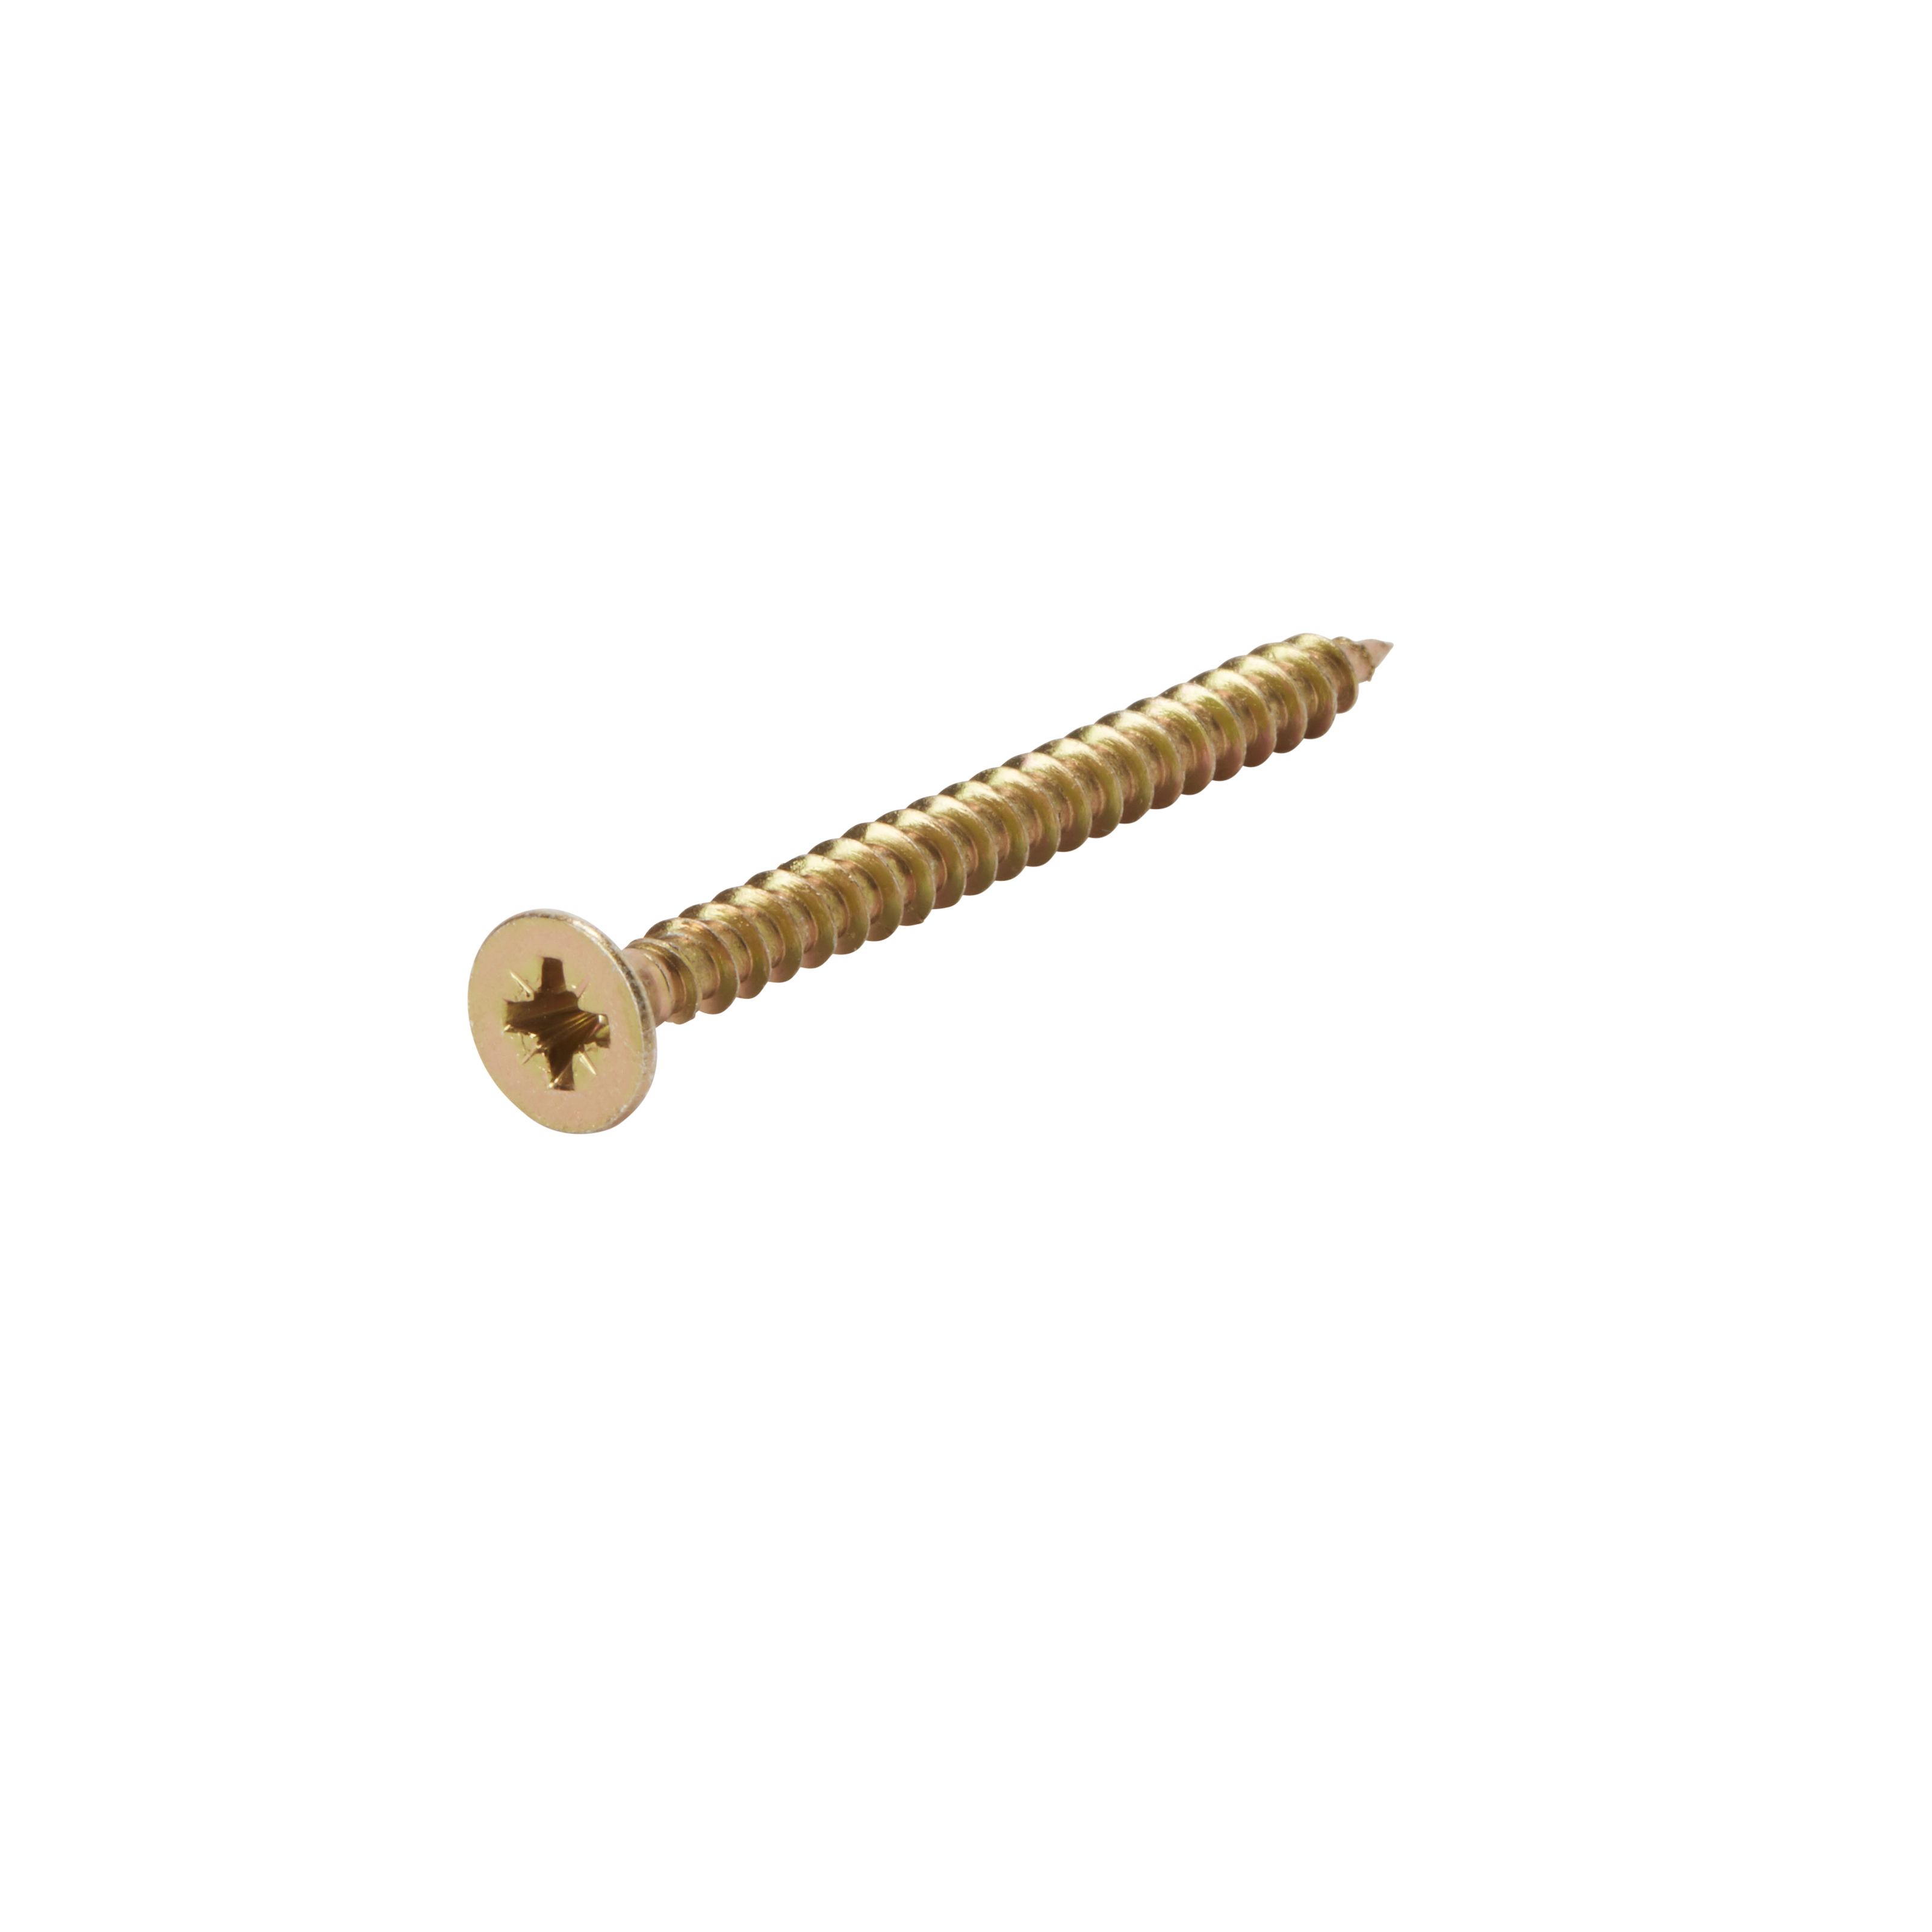 B&Q PZ Double-countersunk Zinc-plated Carbon steel (C1022) Screws trade case, Pack of 1400